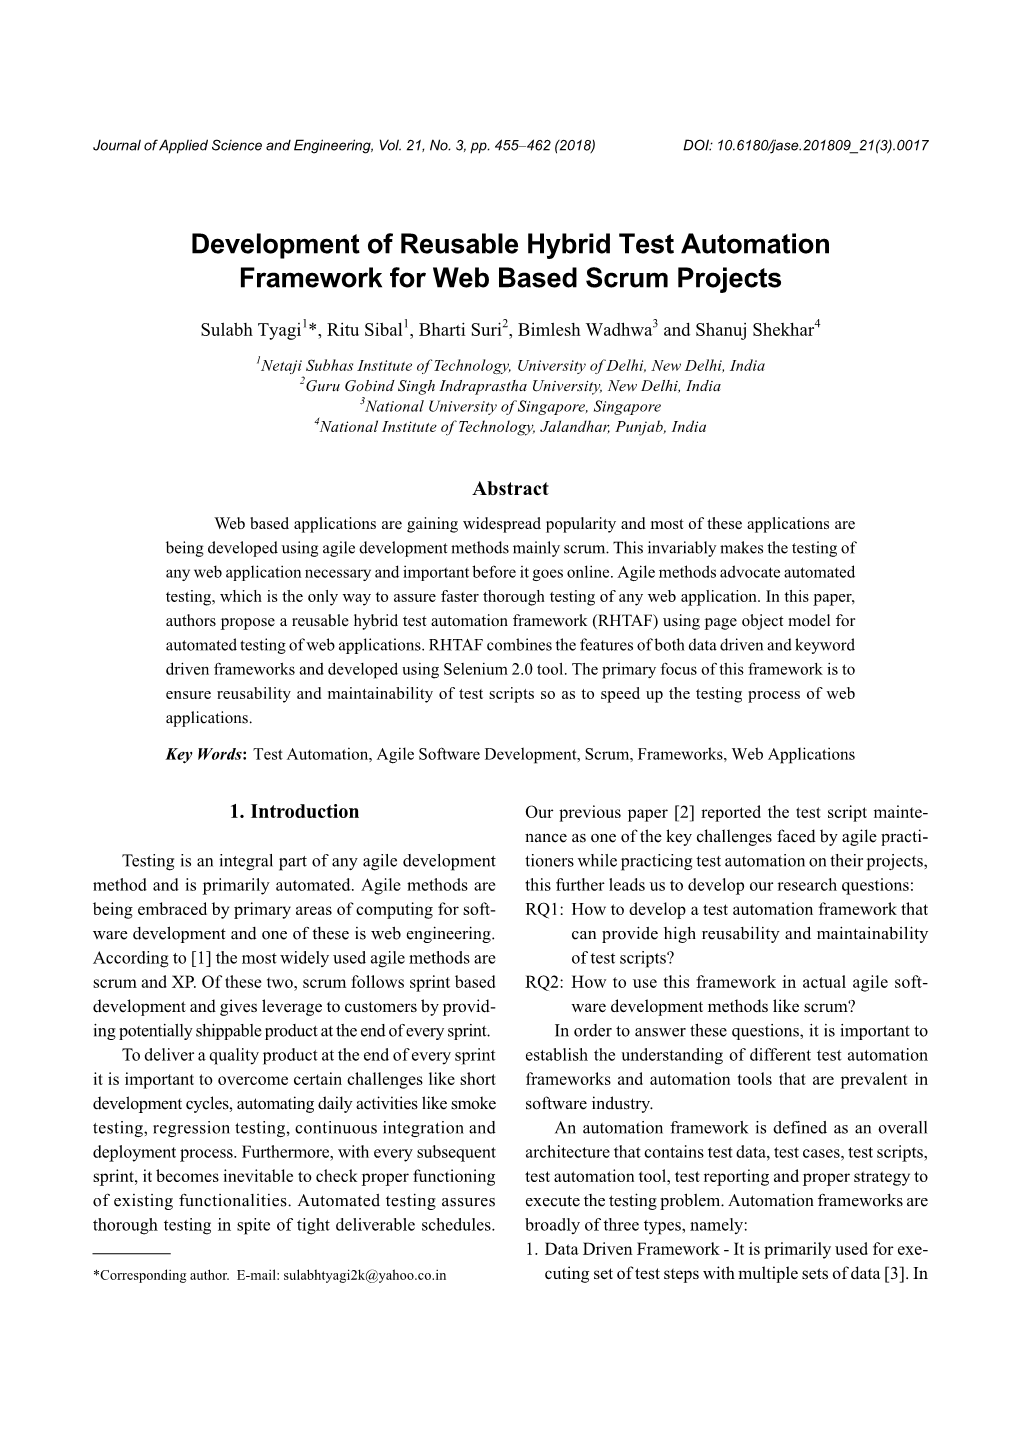 Development of Reusable Hybrid Test Automation Framework for Web Based Scrum Projects